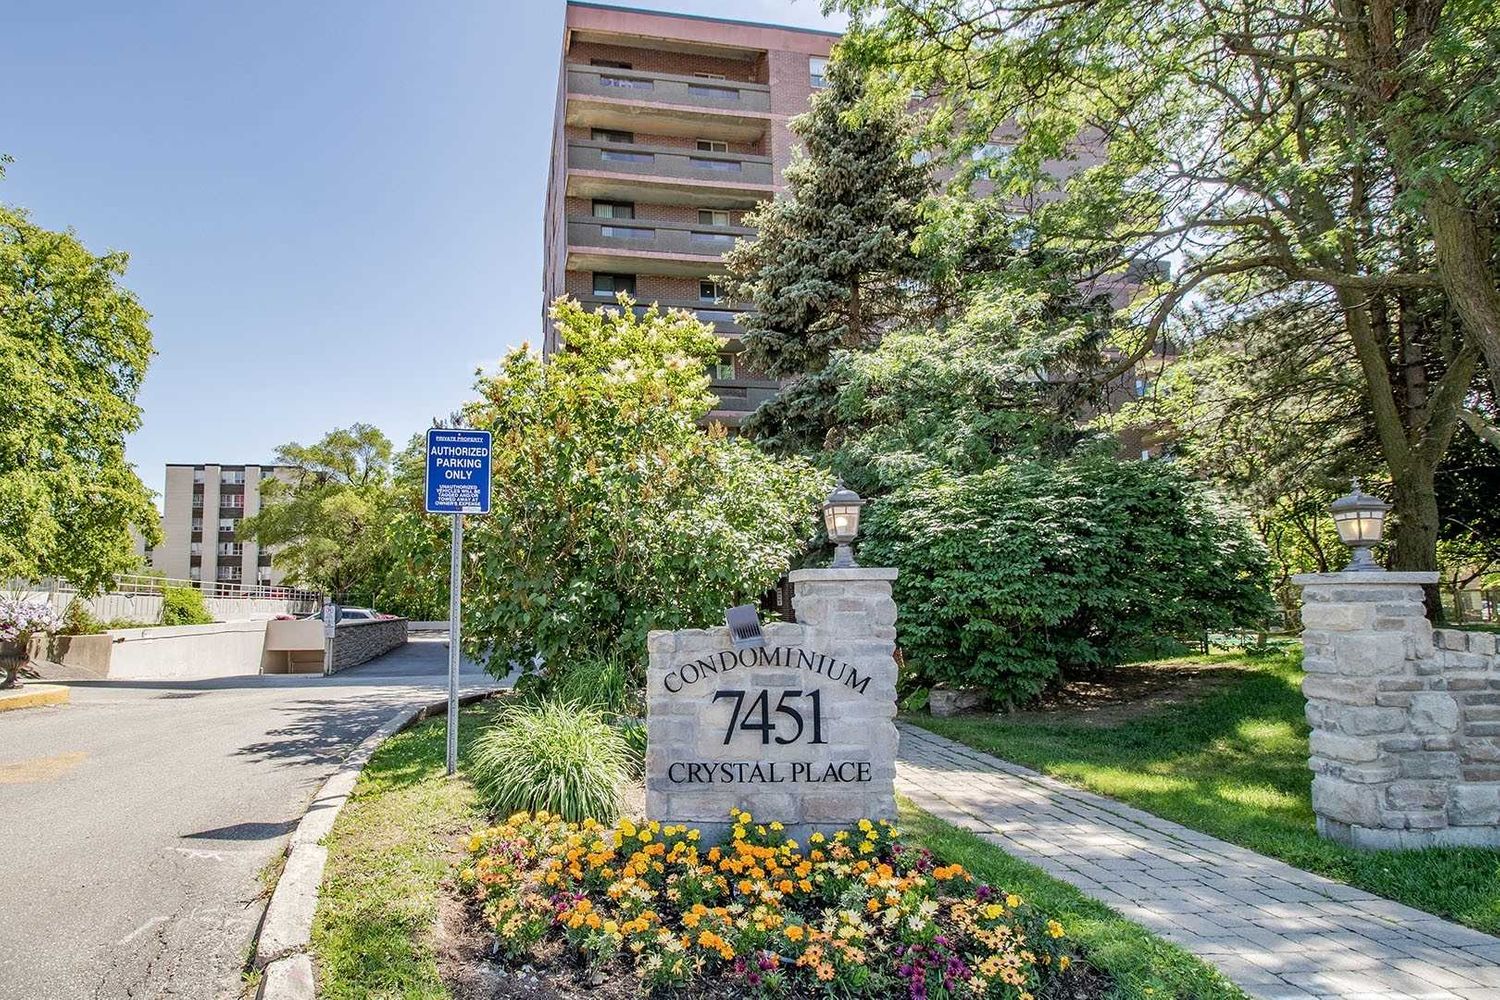 7451 Yonge Street. Crystal Palace Condo is located in  Markham, Toronto - image #2 of 2